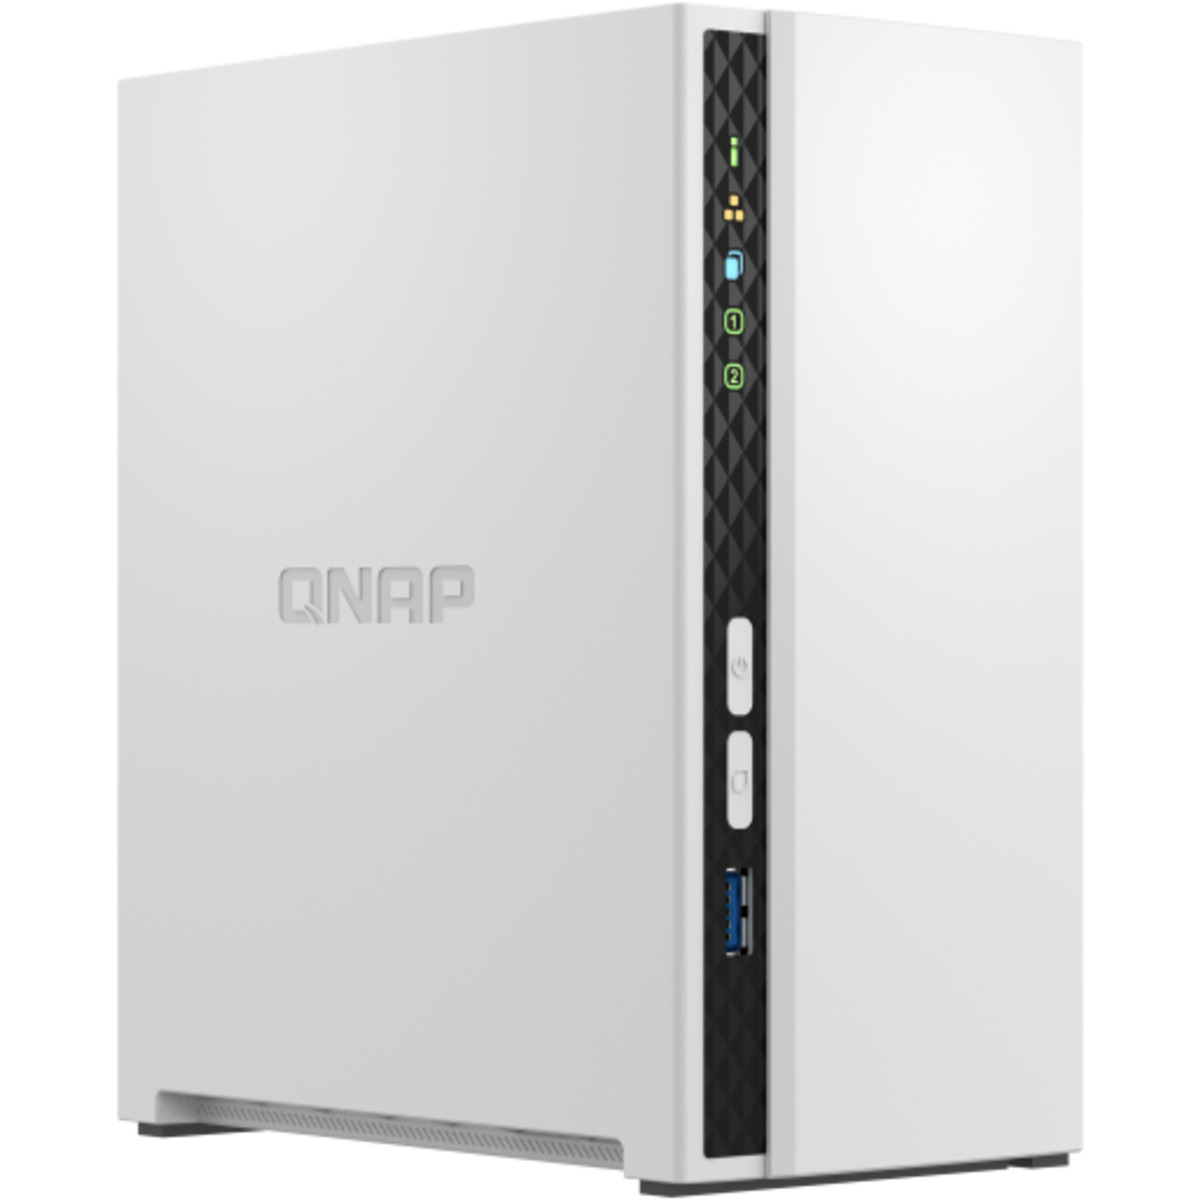 QNAP TS-233 12tb 2-Bay Desktop Personal / Basic Home / Small Office NAS - Network Attached Storage Device 1x12tb Seagate EXOS X18 ST12000NM000J 3.5 7200rpm SATA 6Gb/s HDD ENTERPRISE Class Drives Installed - Burn-In Tested TS-233